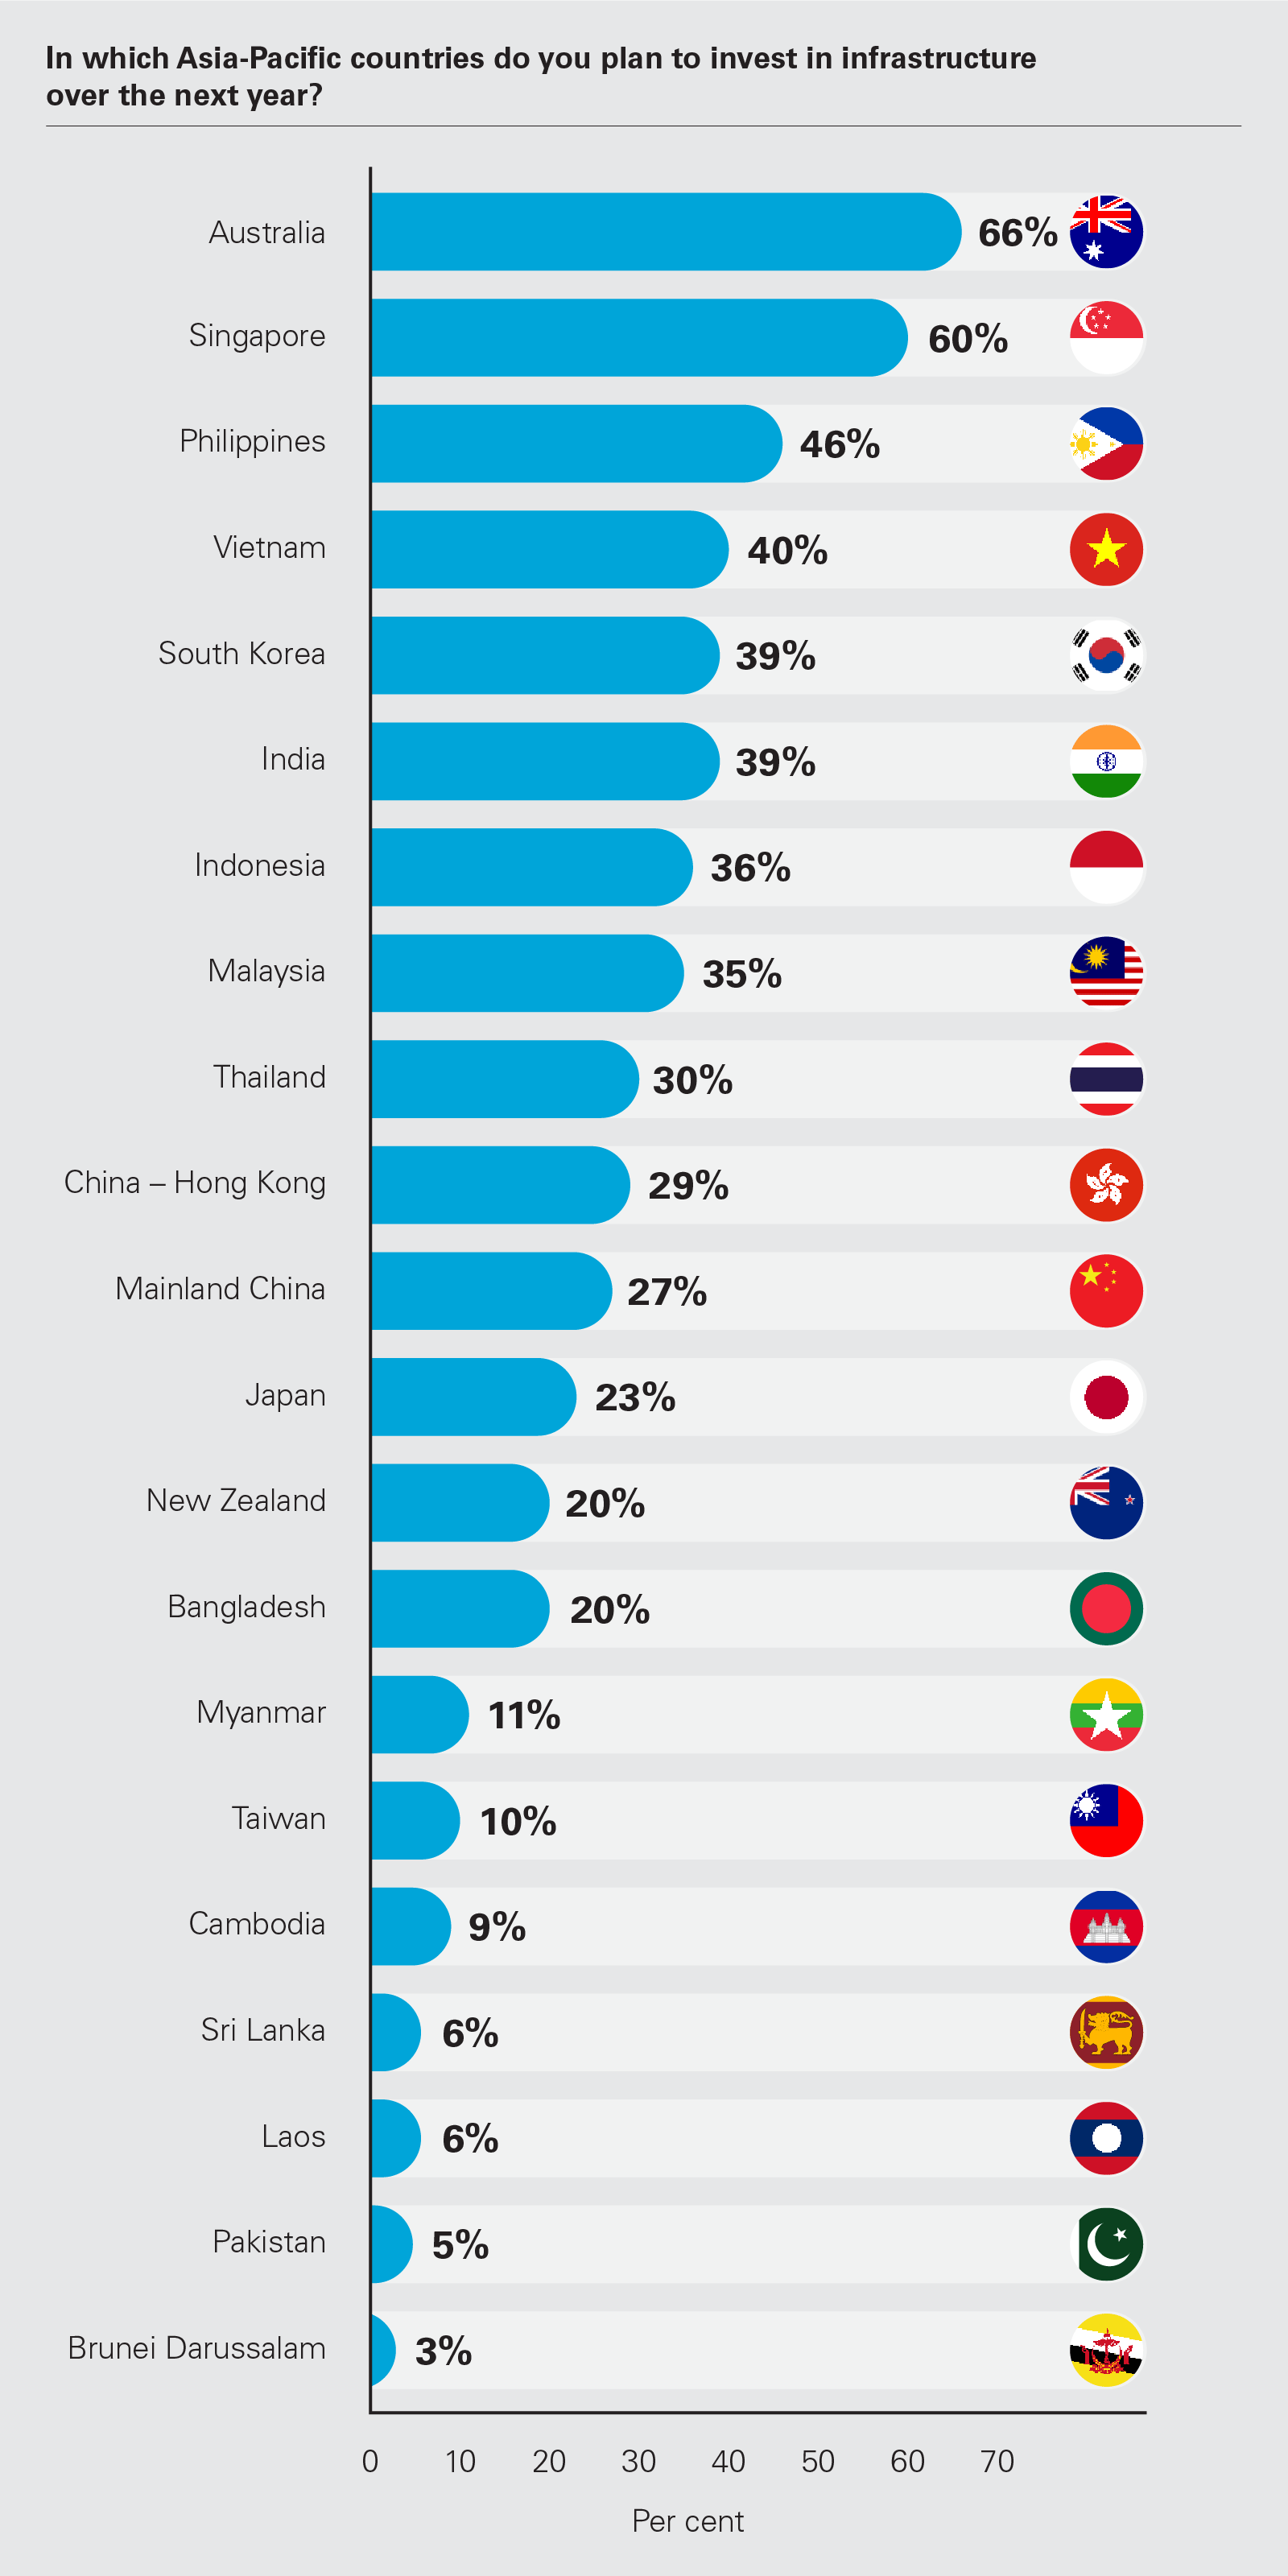 In which Asia-Pacific countries do you plan to invest in infrastructure over the next year?